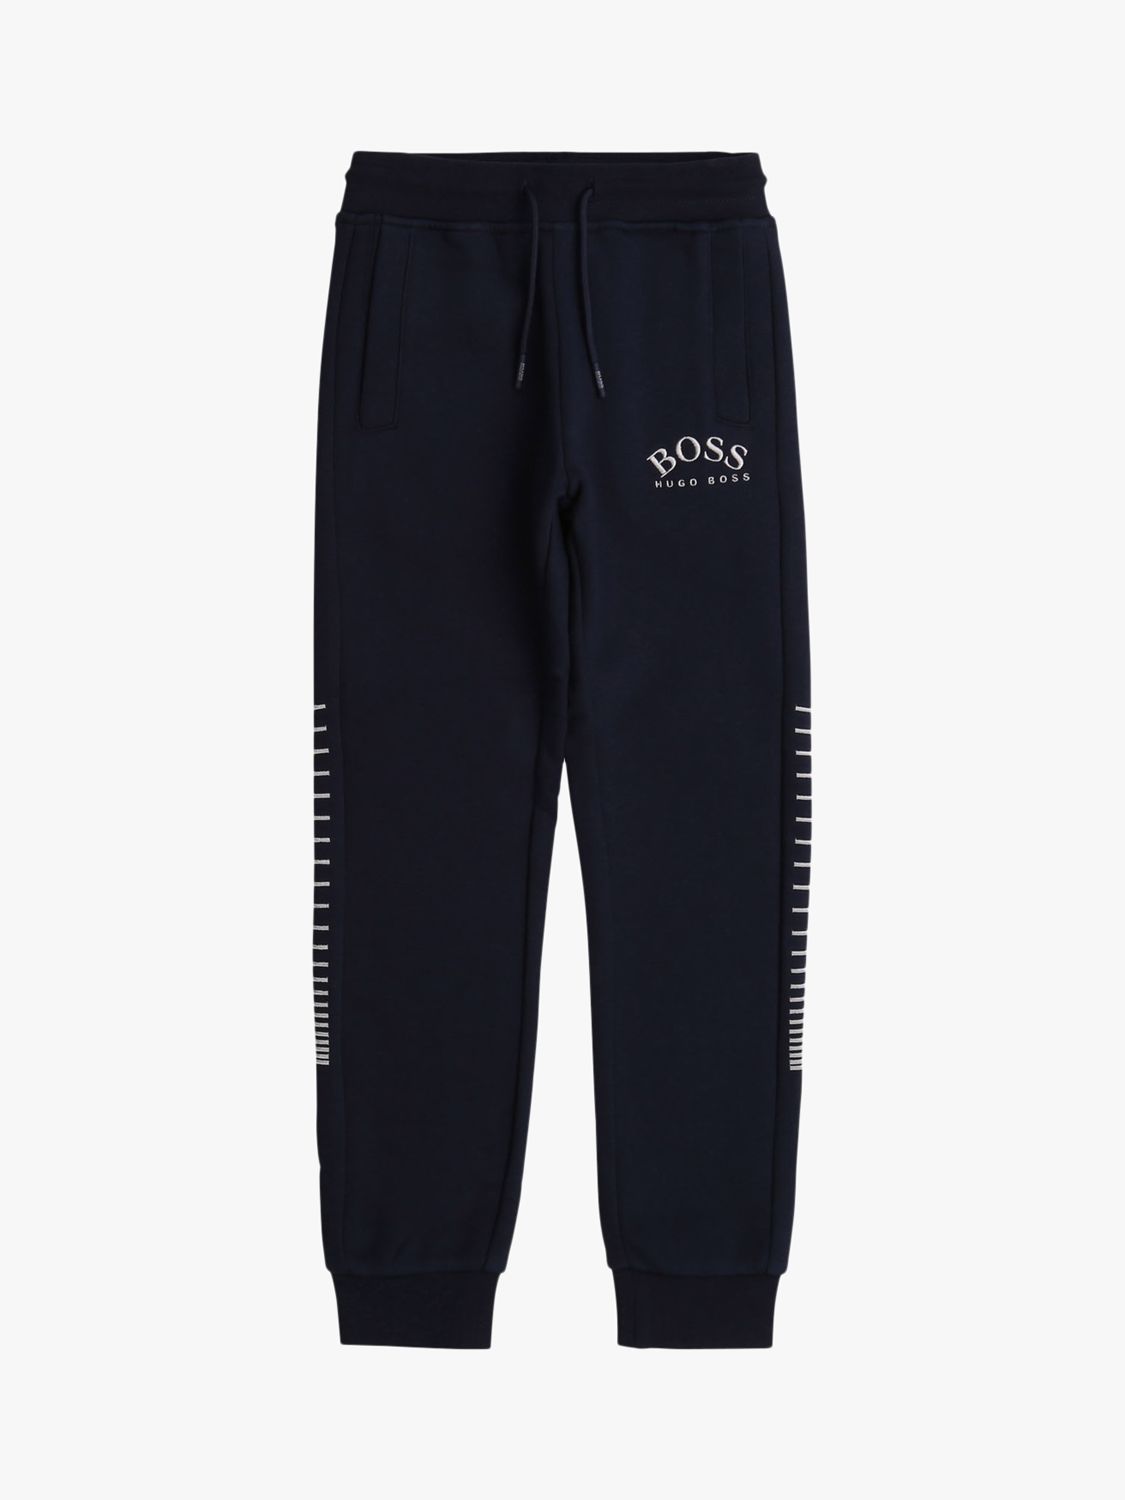 HUGO BOSS Boys' Embroidered Joggers, Navy at John Lewis & Partners